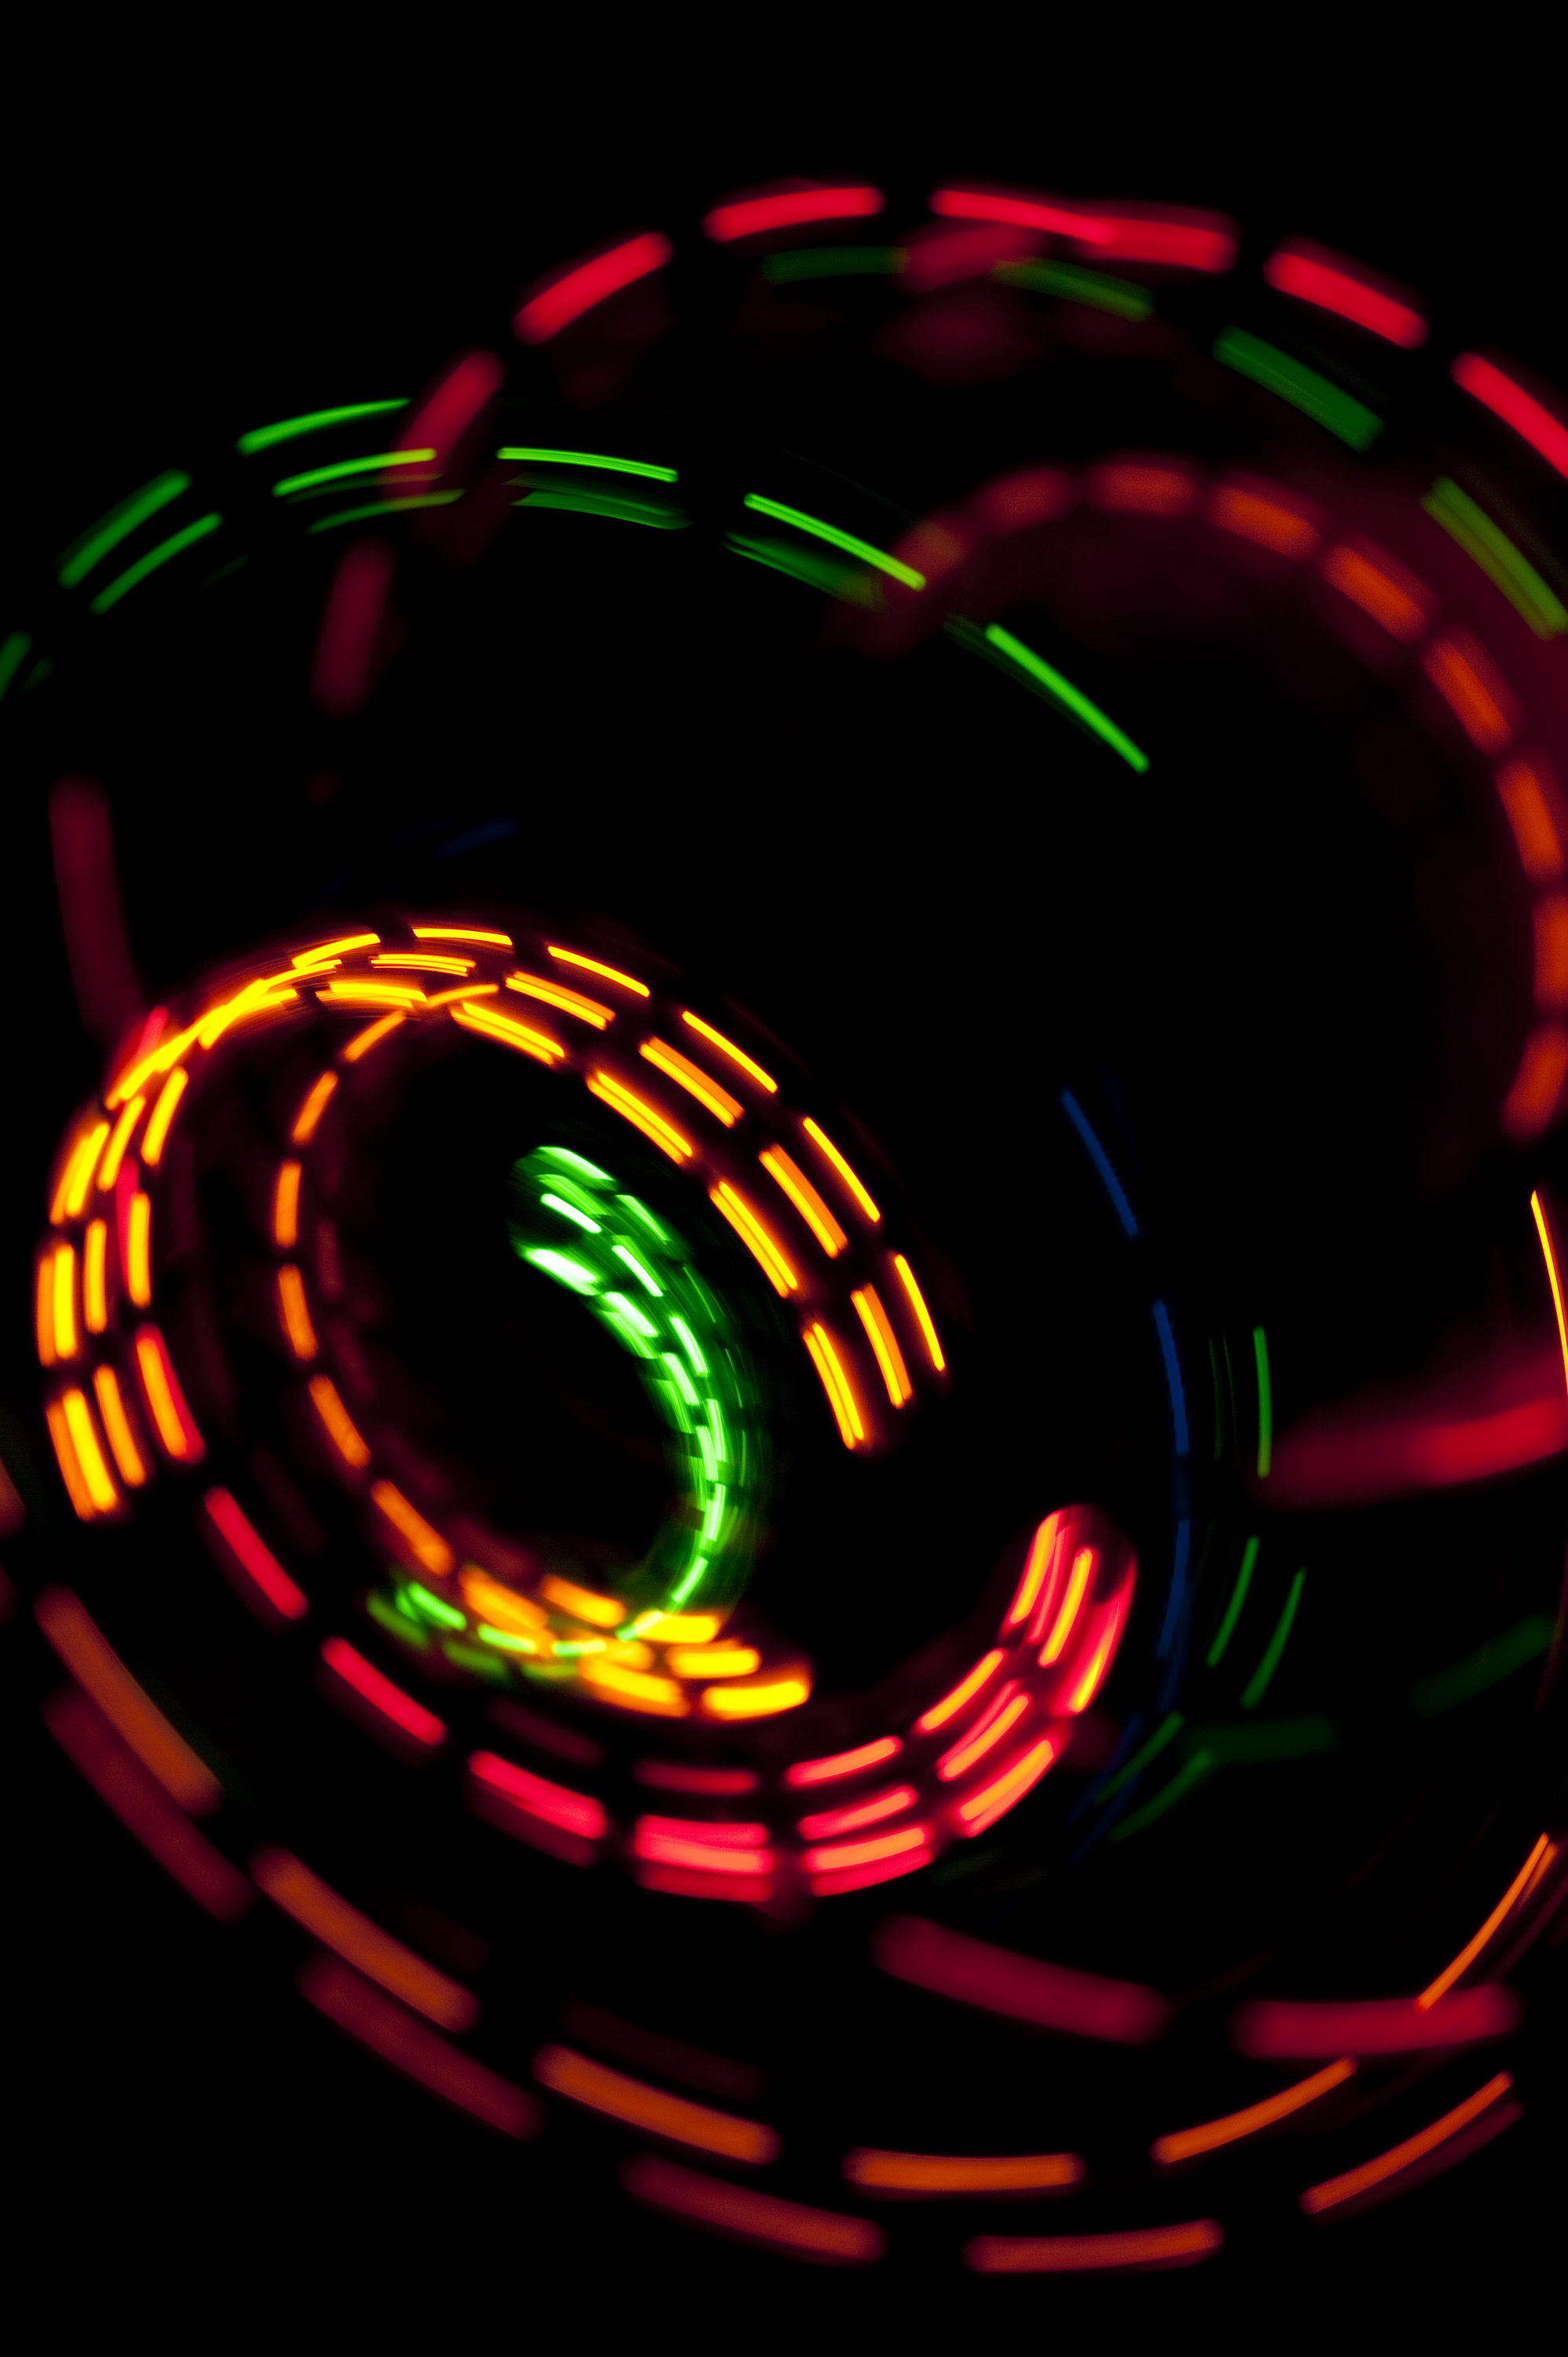 movement, abstract, shine, light, multicolored, motley, traffic, long exposure Image for desktop